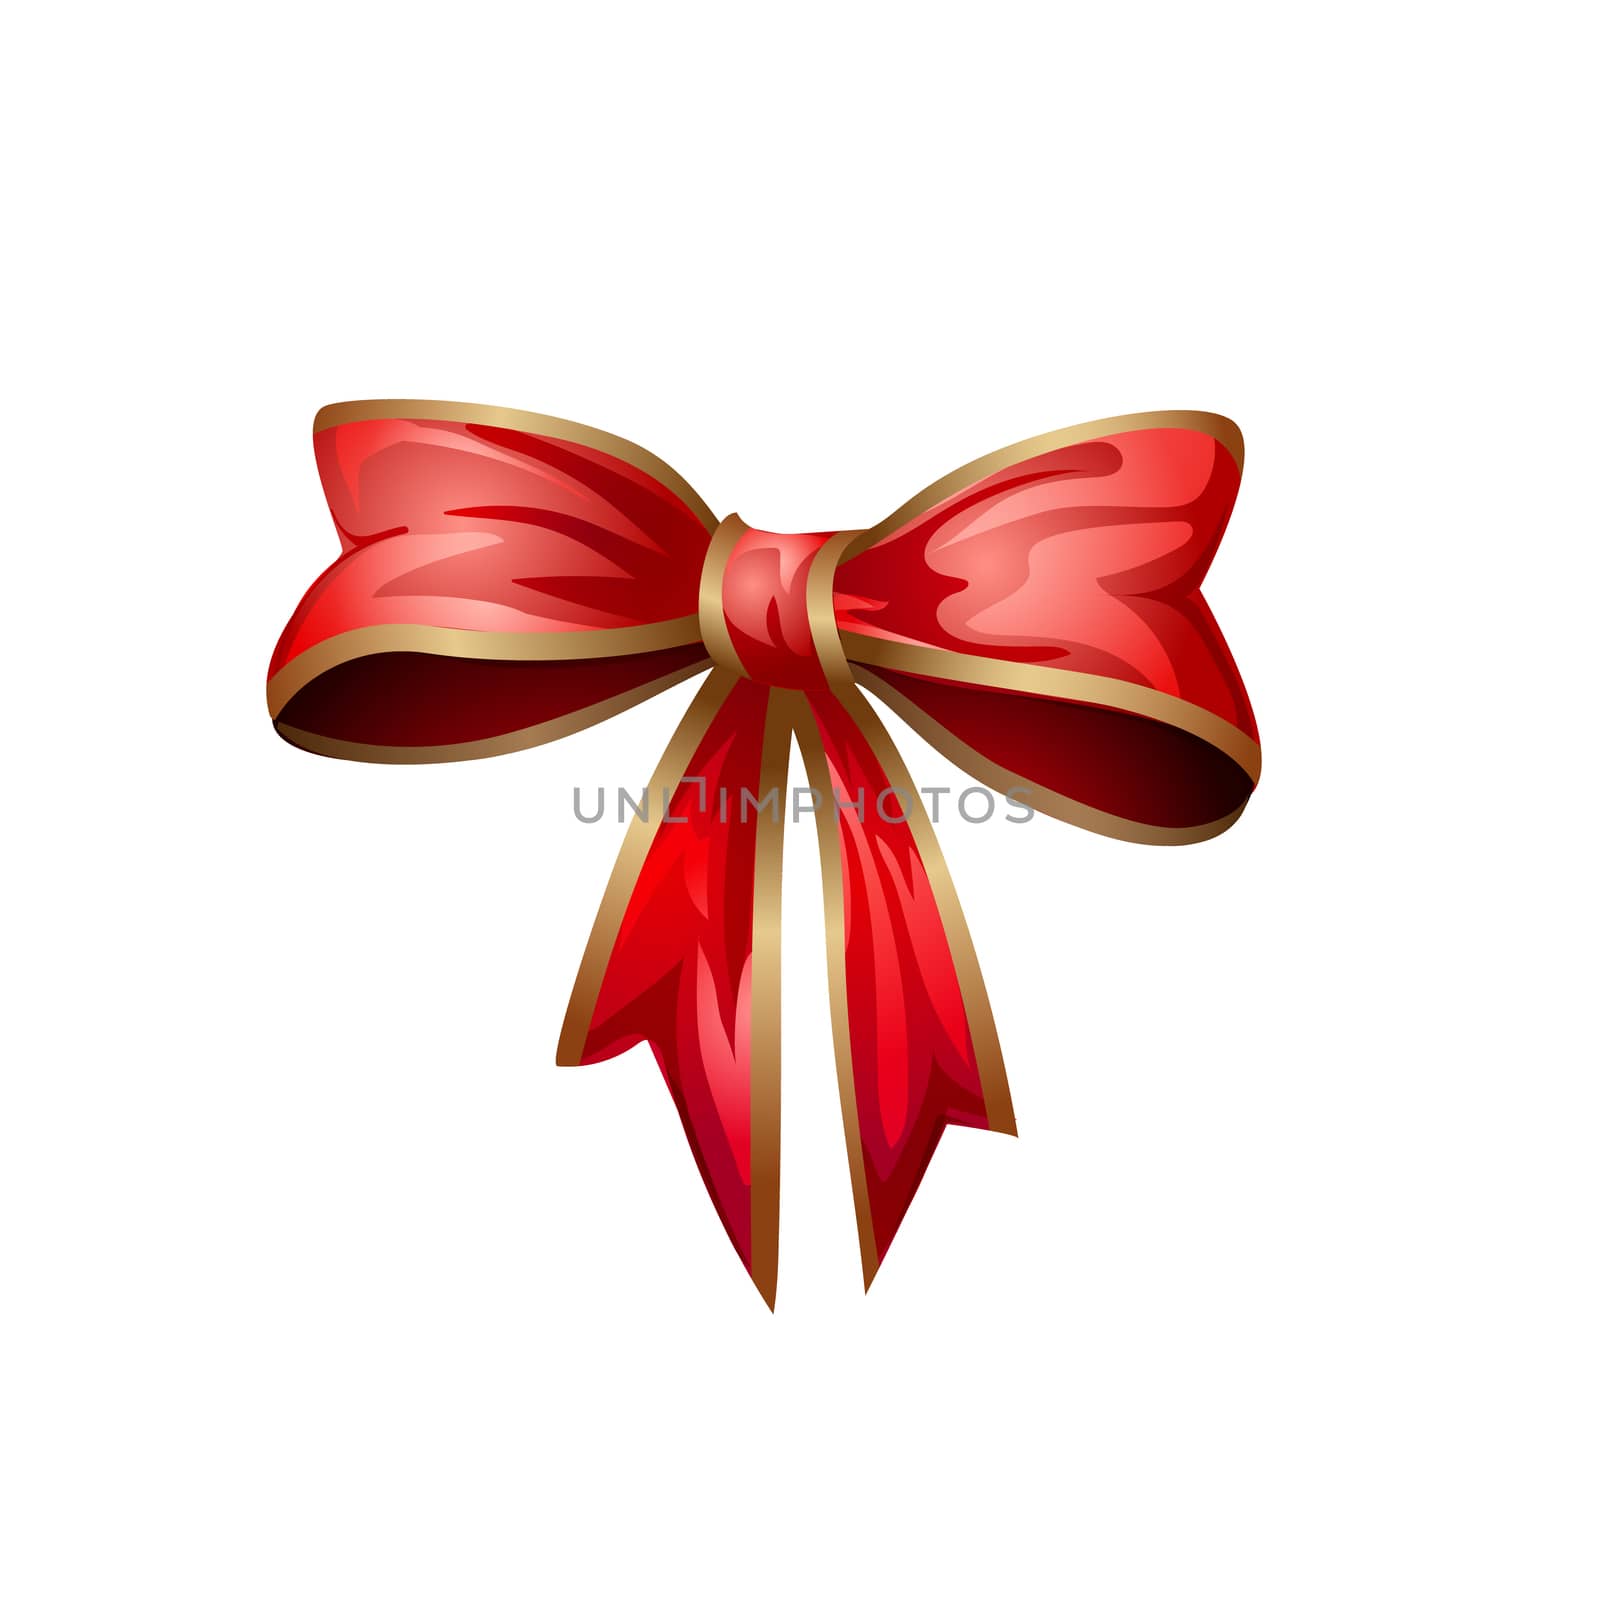 Red colored bows. Cartoon style bows isolated on white background. Vector decorate clip art eps 10.